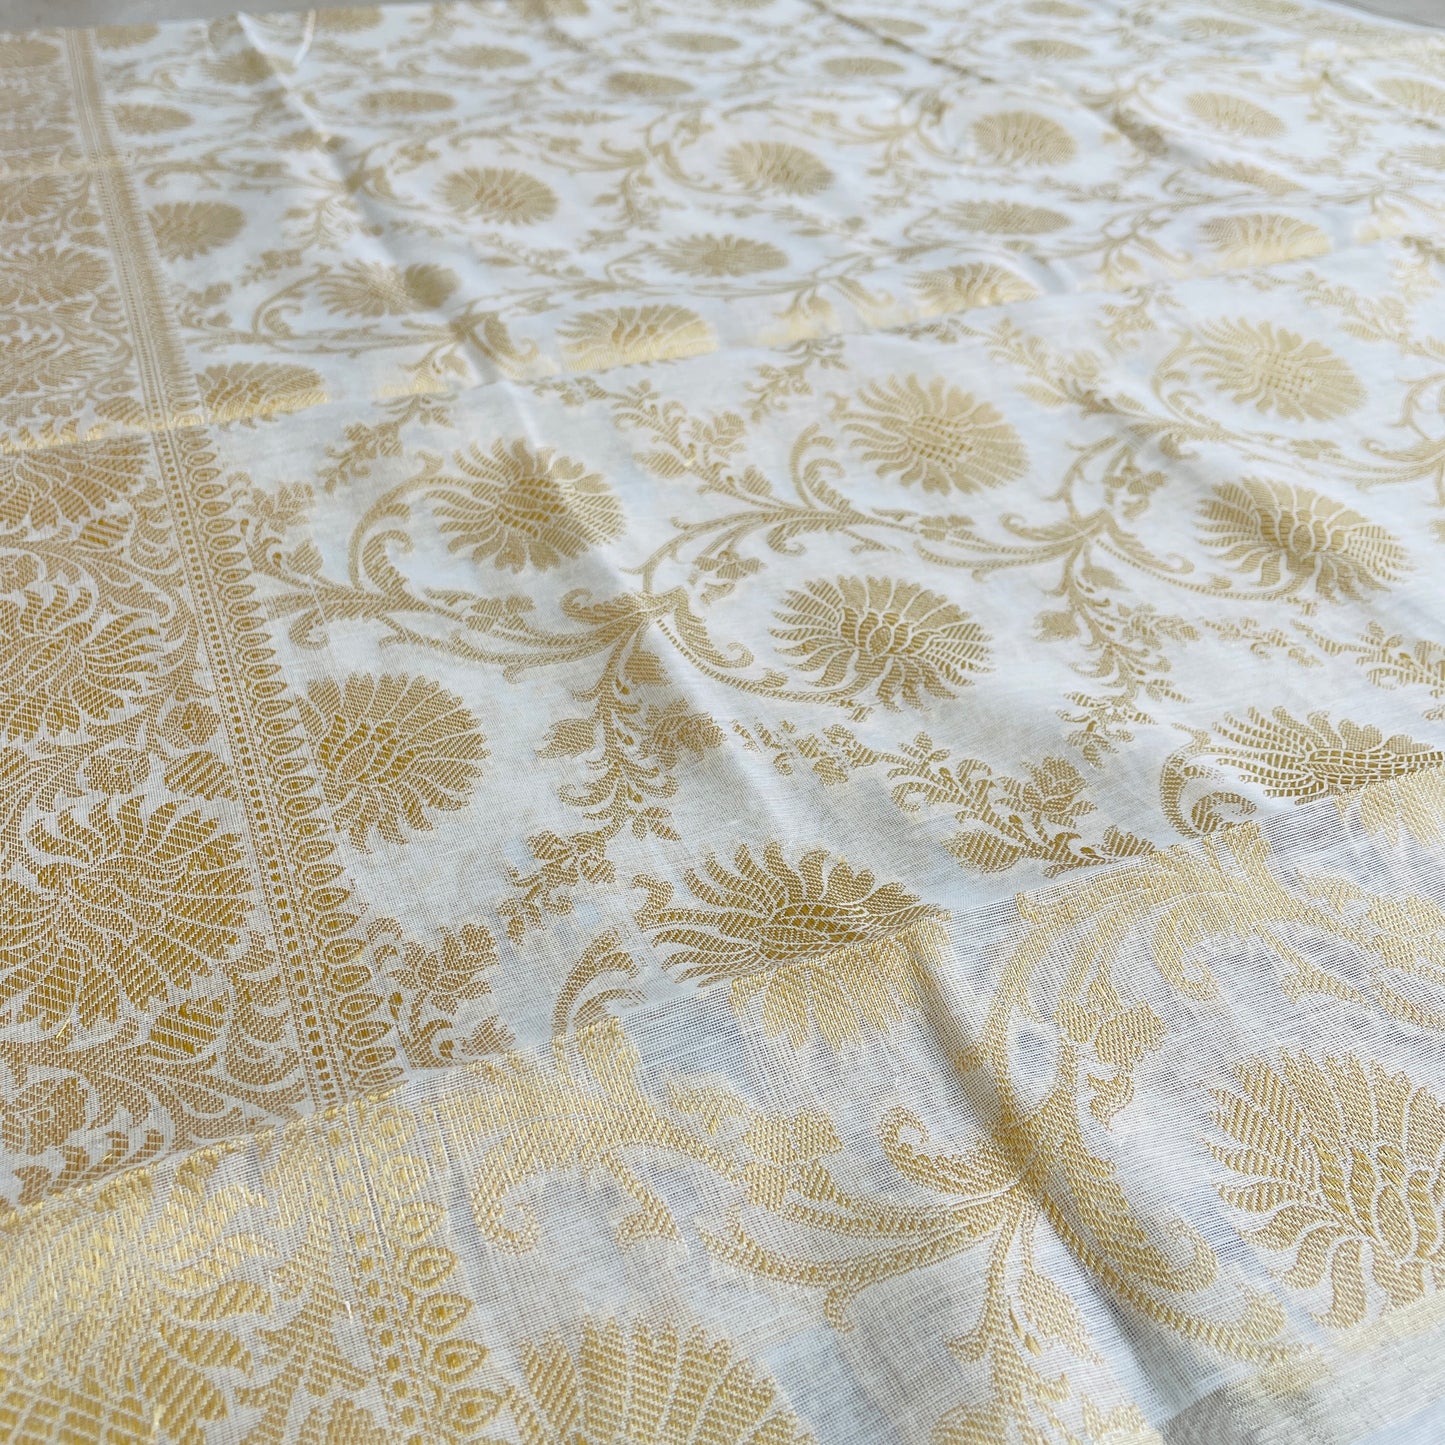 Banarasi Cotton Silk Unstitched Suit Material - White and Gold